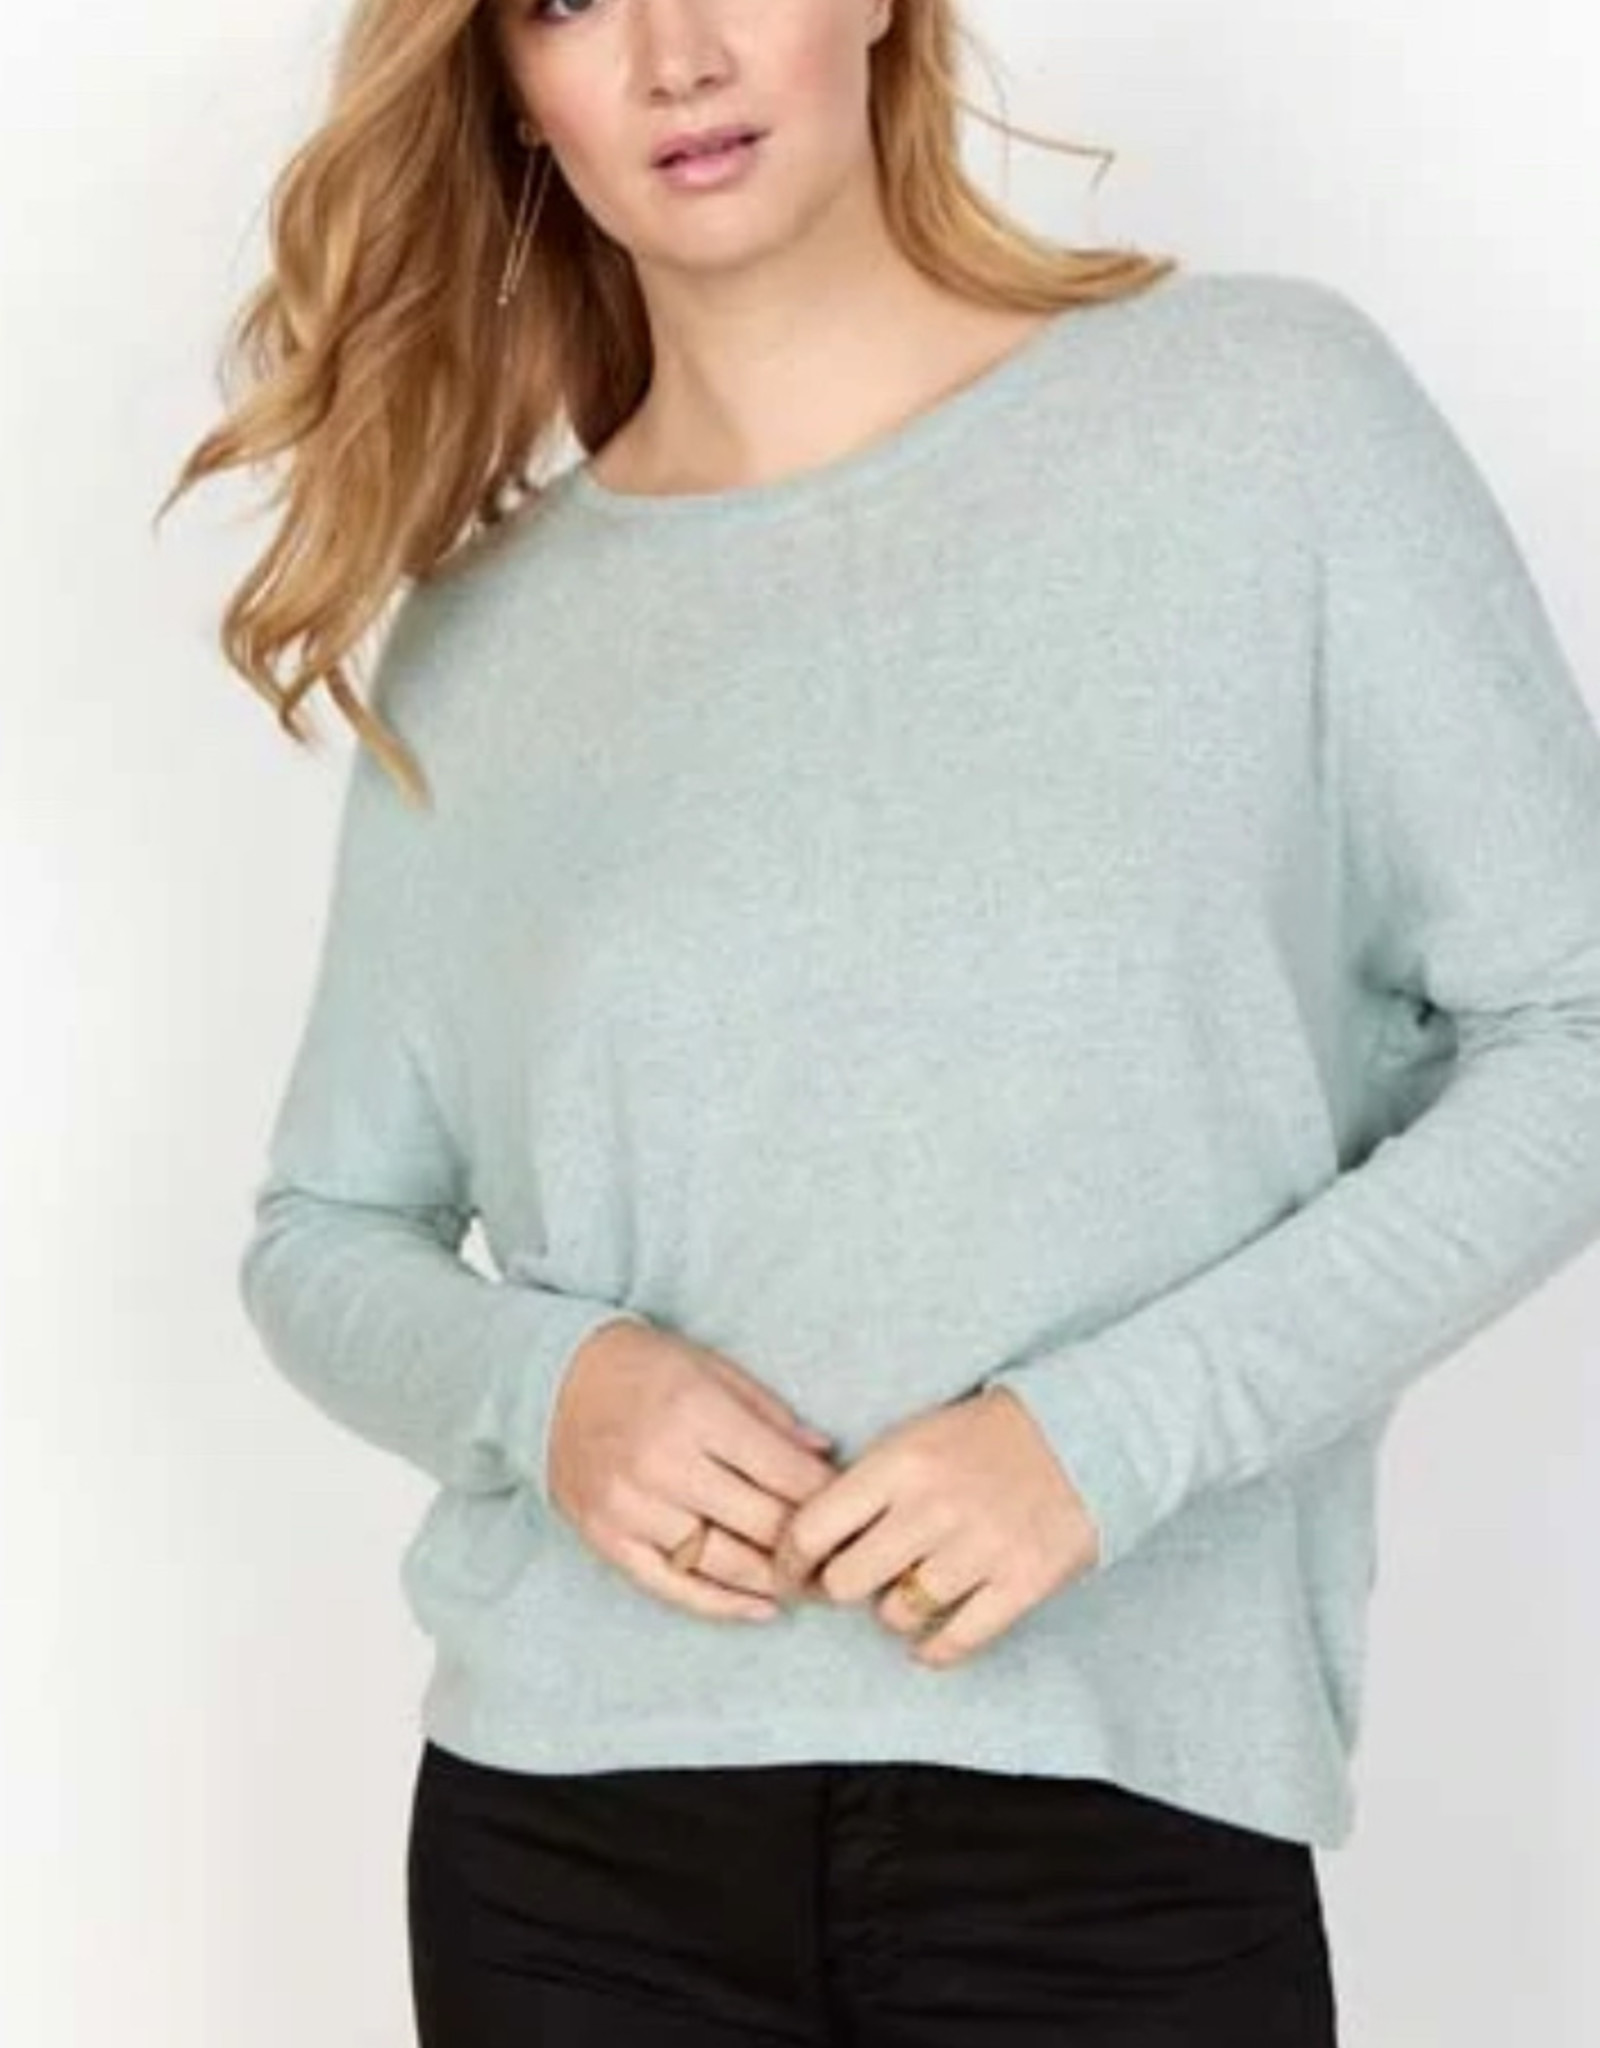 Soya Concept Soya Concept SC-Biara 1 Loose Knit Top with Drop shoulders